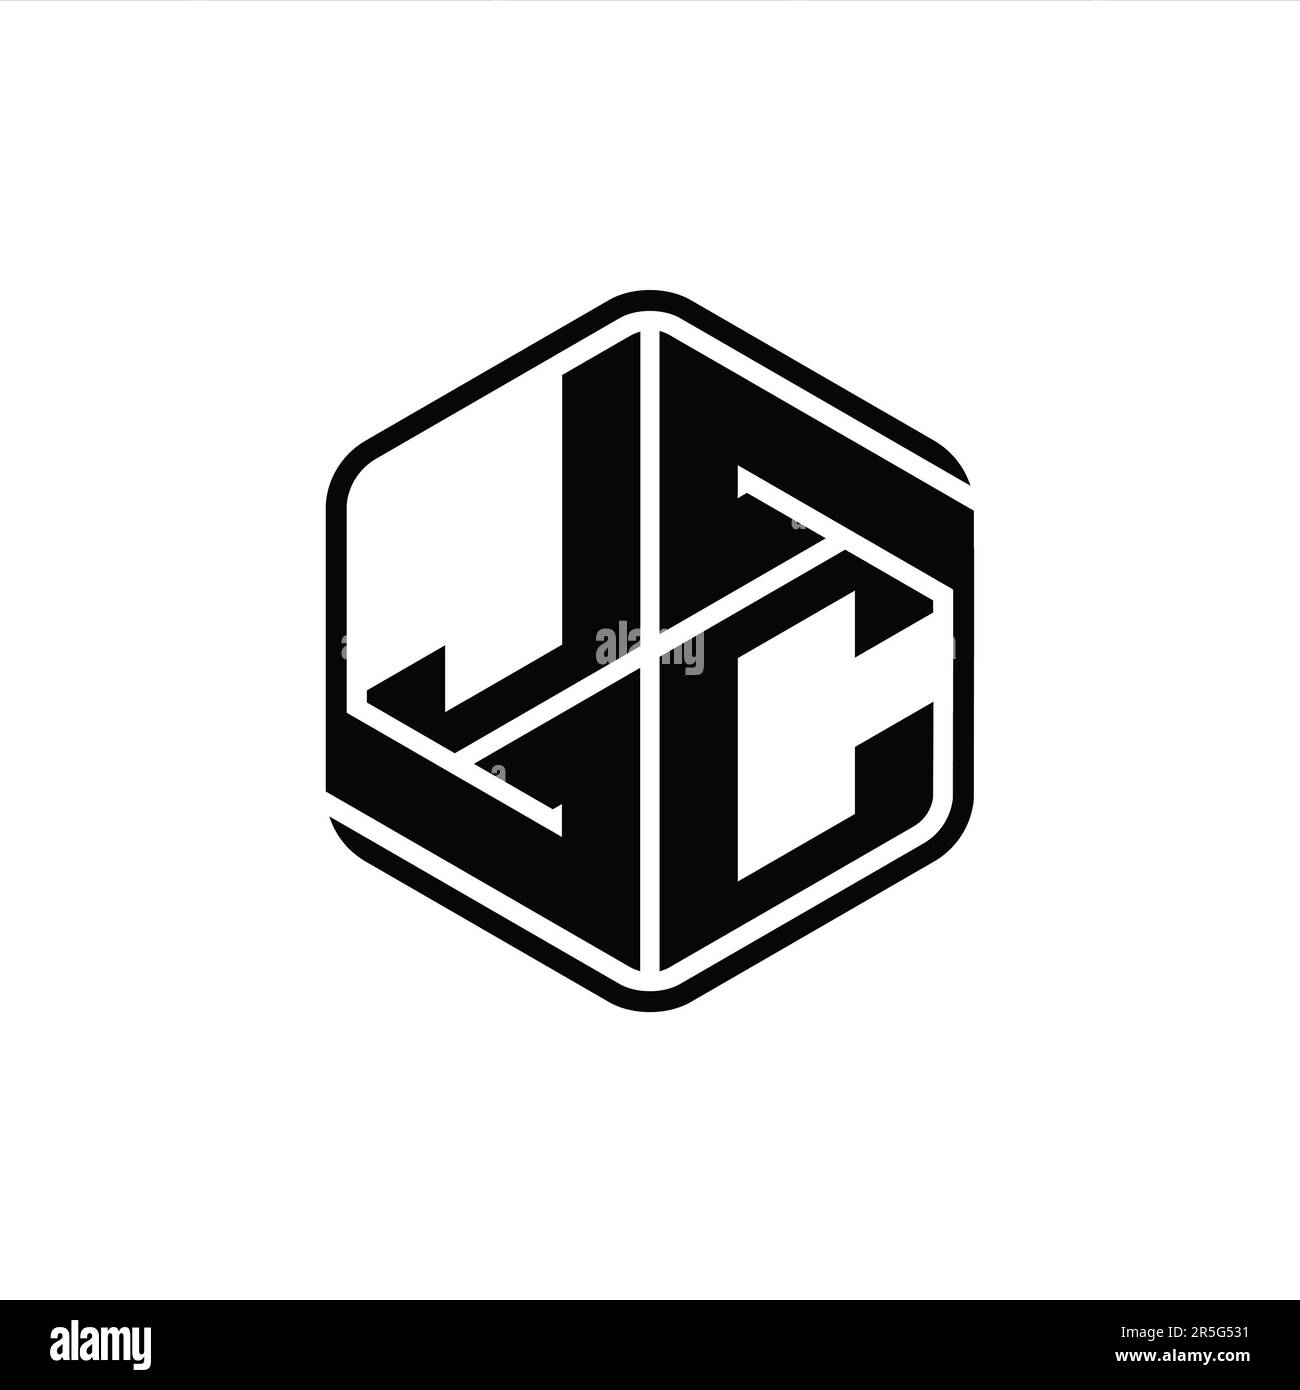 JC Letter Logo monogram hexagon shape with ornament abstract isolated outline design template Stock Photo